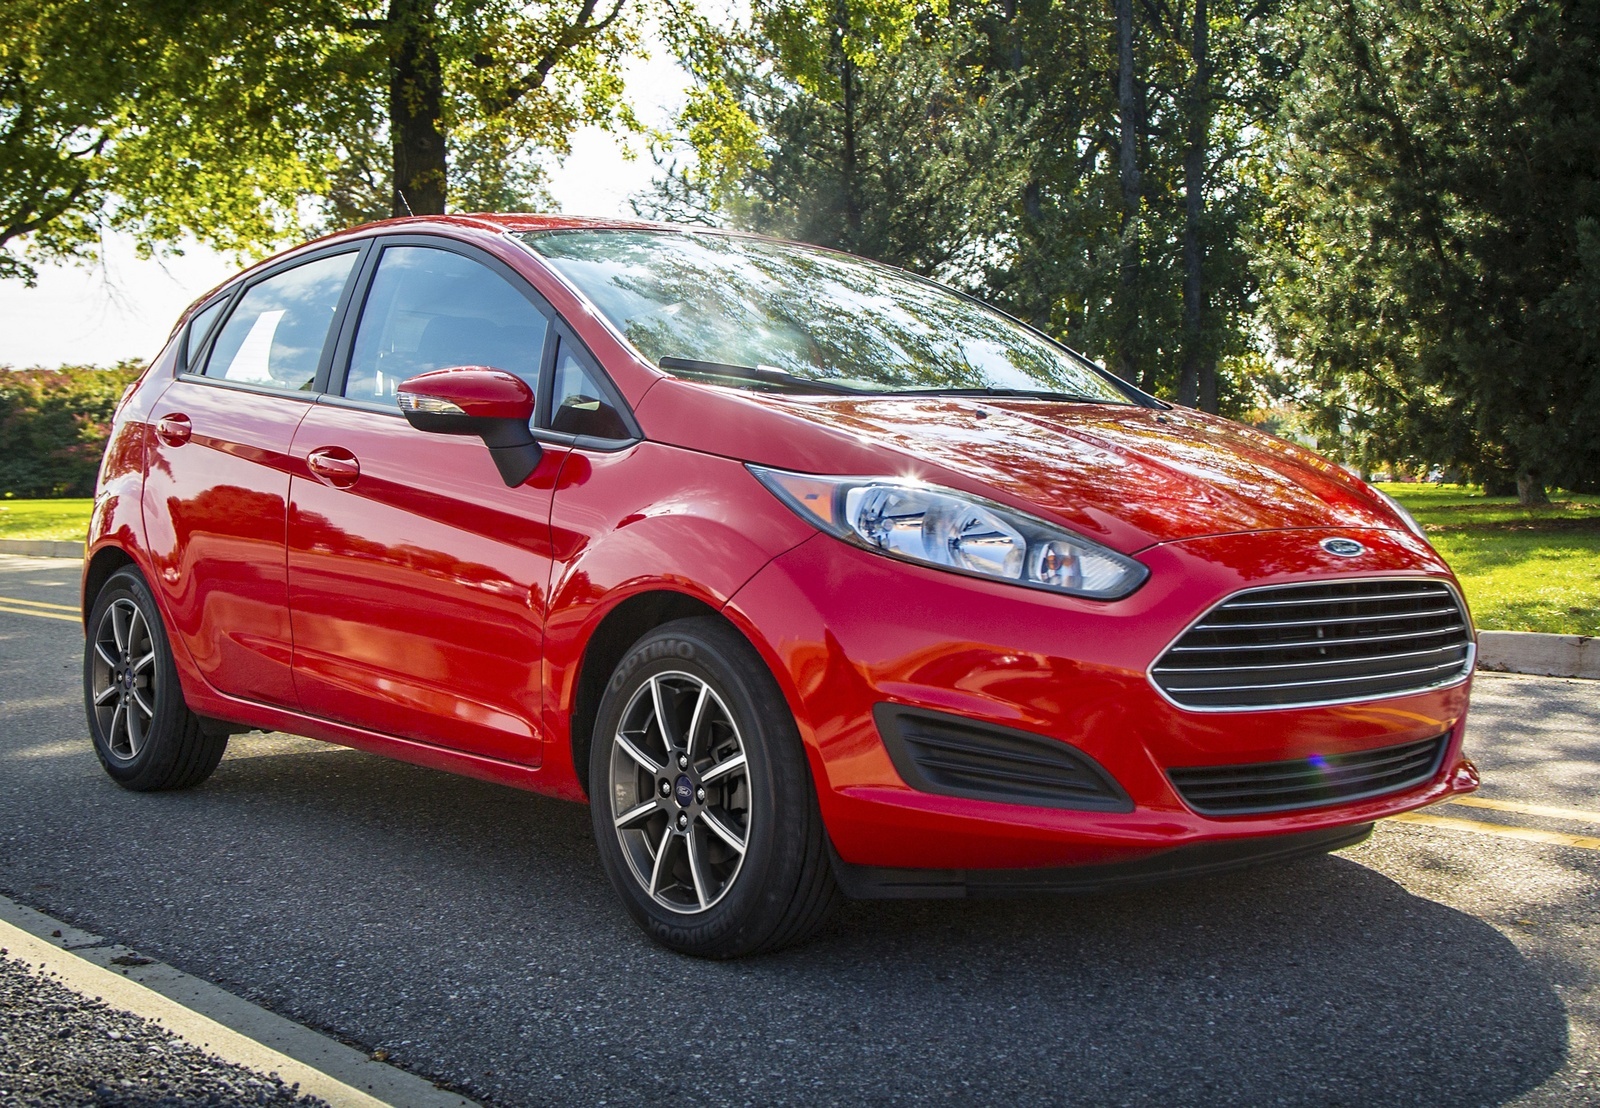 2015 Ford Fiesta: Prices, Reviews & Pictures - CarGurus